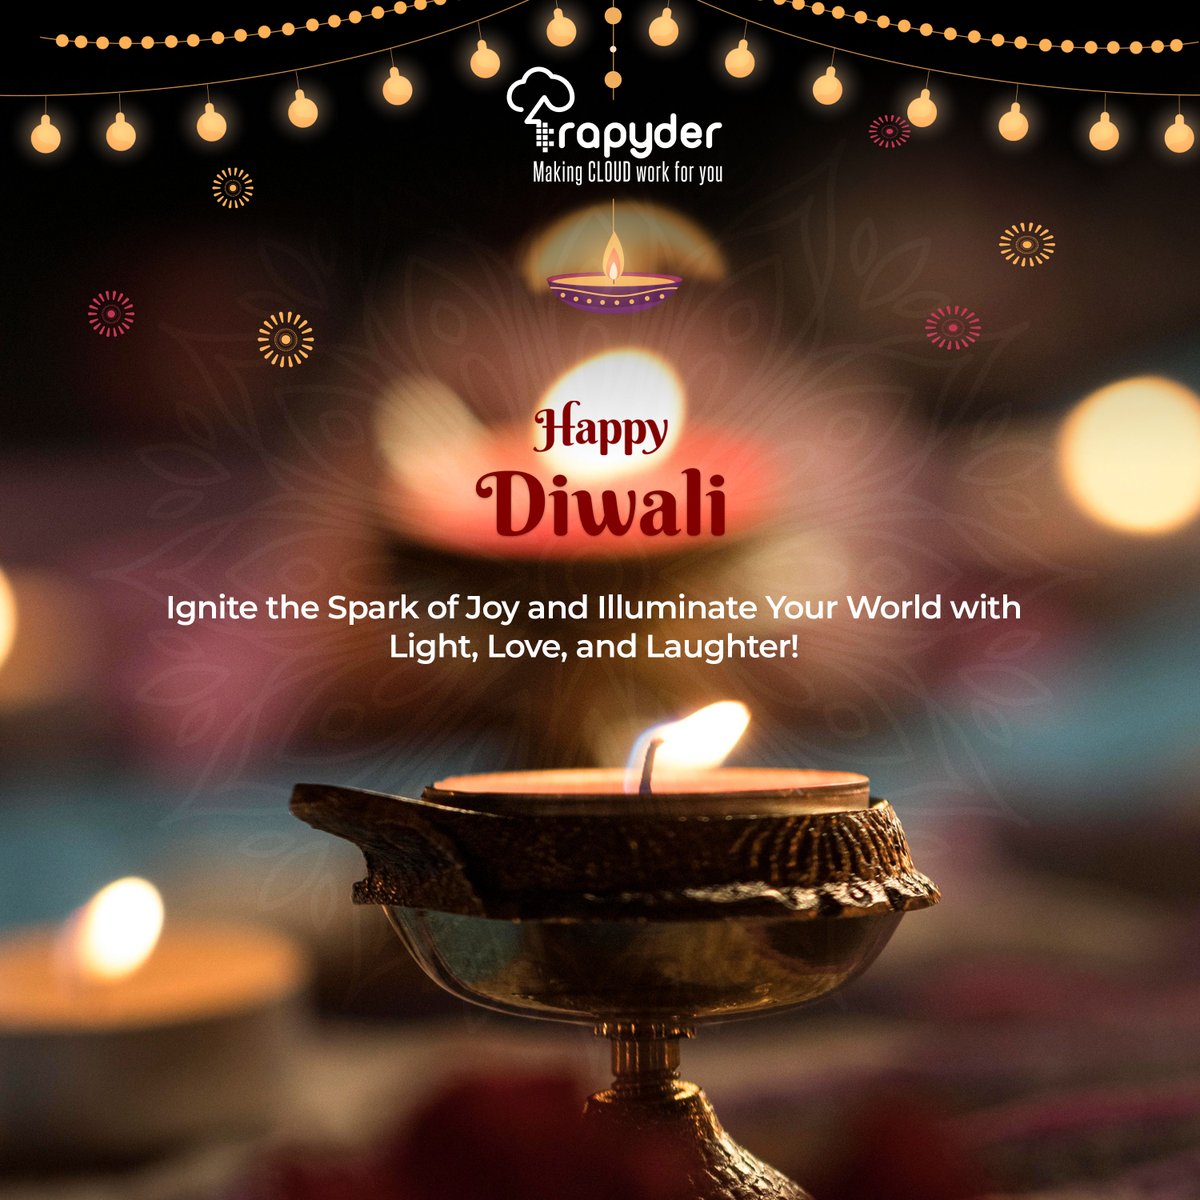 12th November: Diwali It’s time to embrace the brilliance of positivity, the warmth of togetherness, and the radiance of hope. Wishing you all a very Happy Diwali!! #HappyDiwali #Diwali #lights #festivaloflights